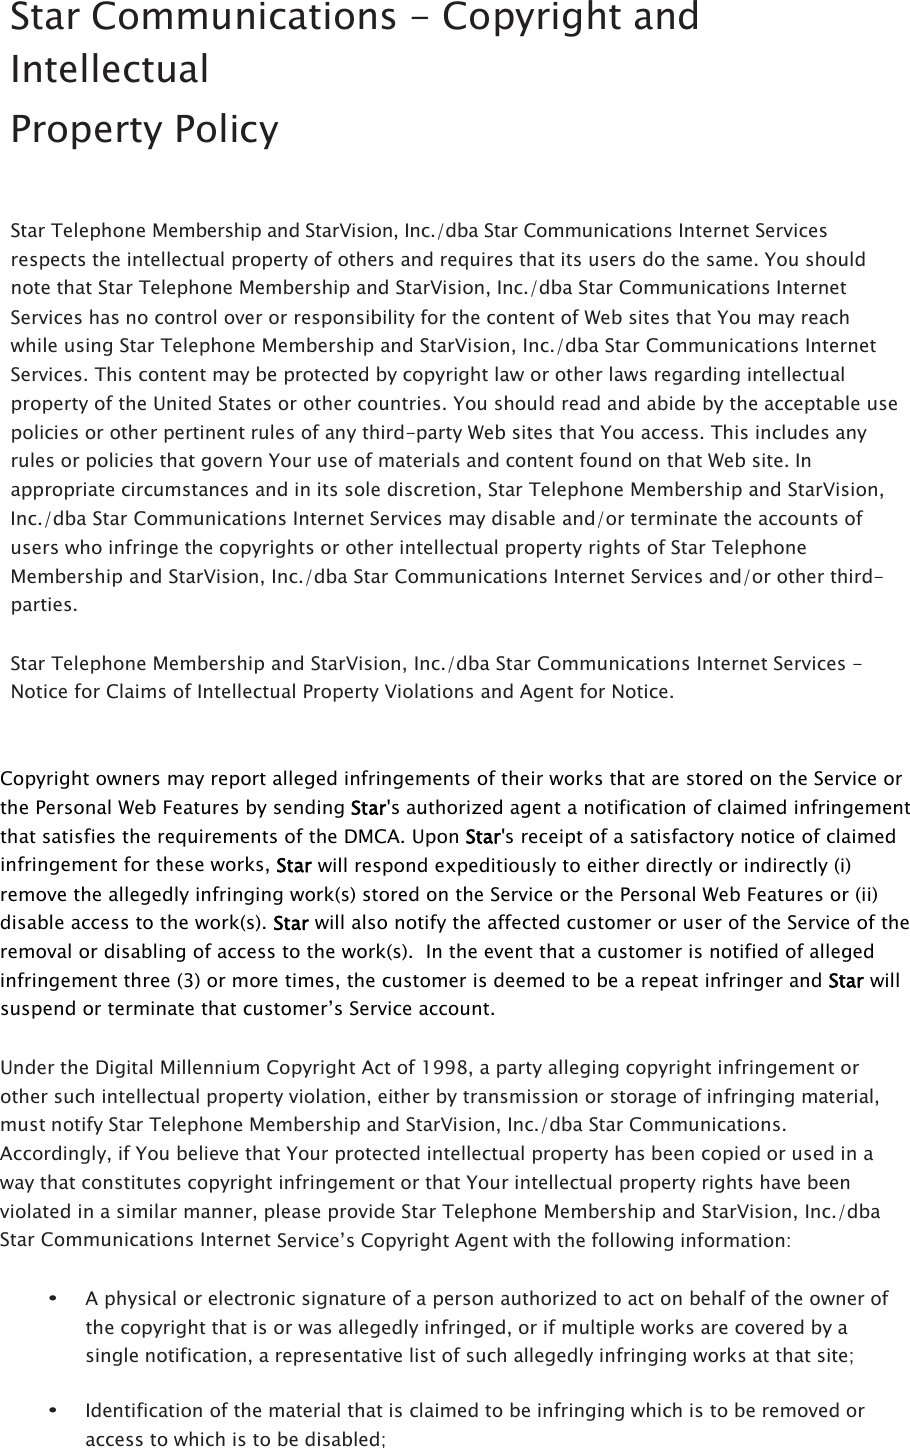 Page 1 of 3 - Star Telephone - Copyright And Intellectual Property Policy Copyright-Policy